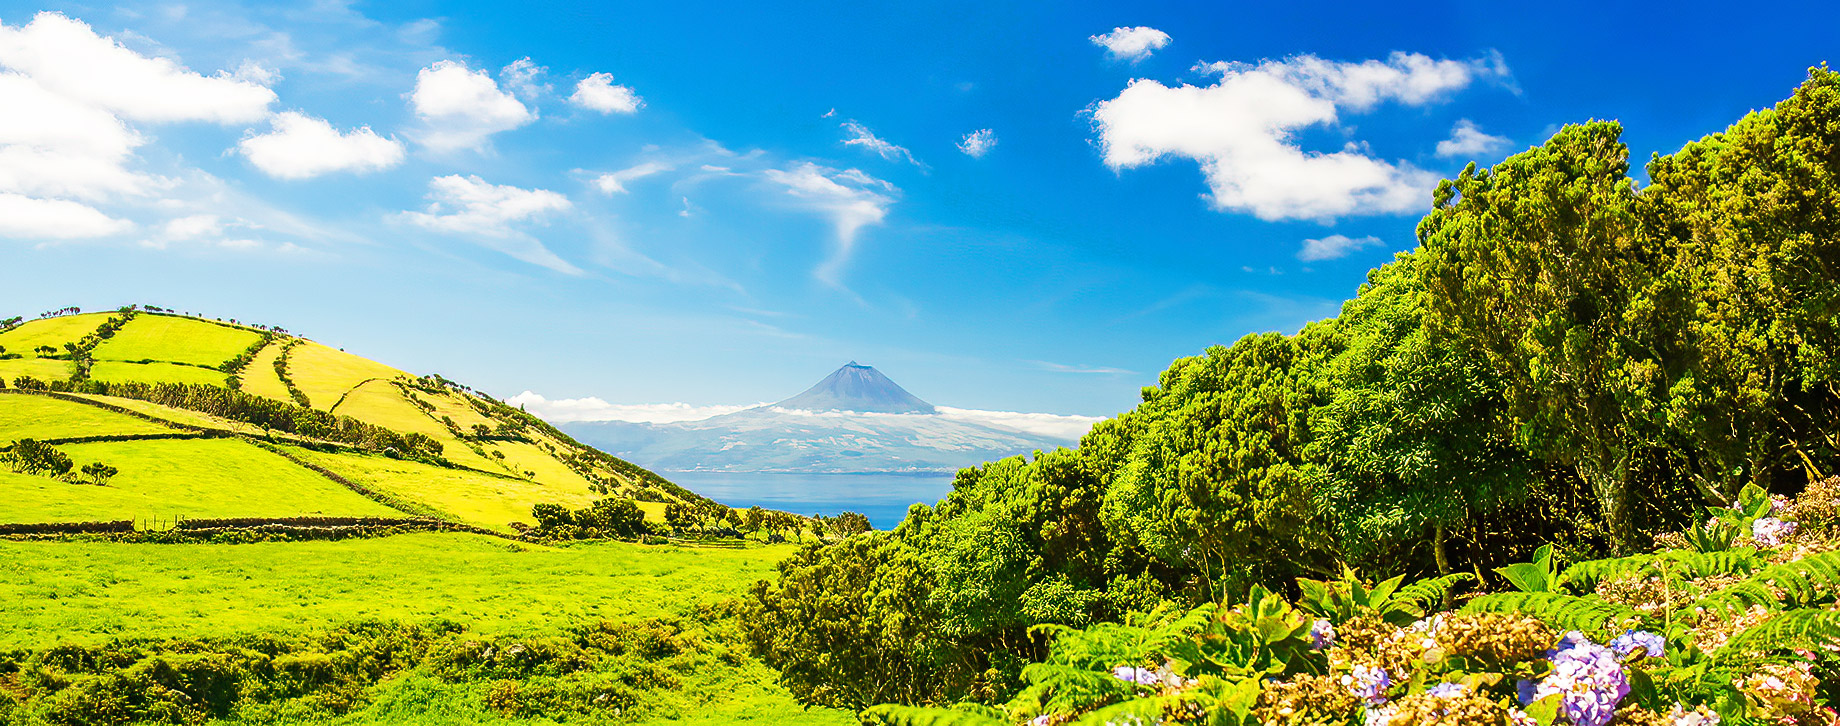 Peak View From San Jorge Island In Portugal - Landscape of The Azores Islands